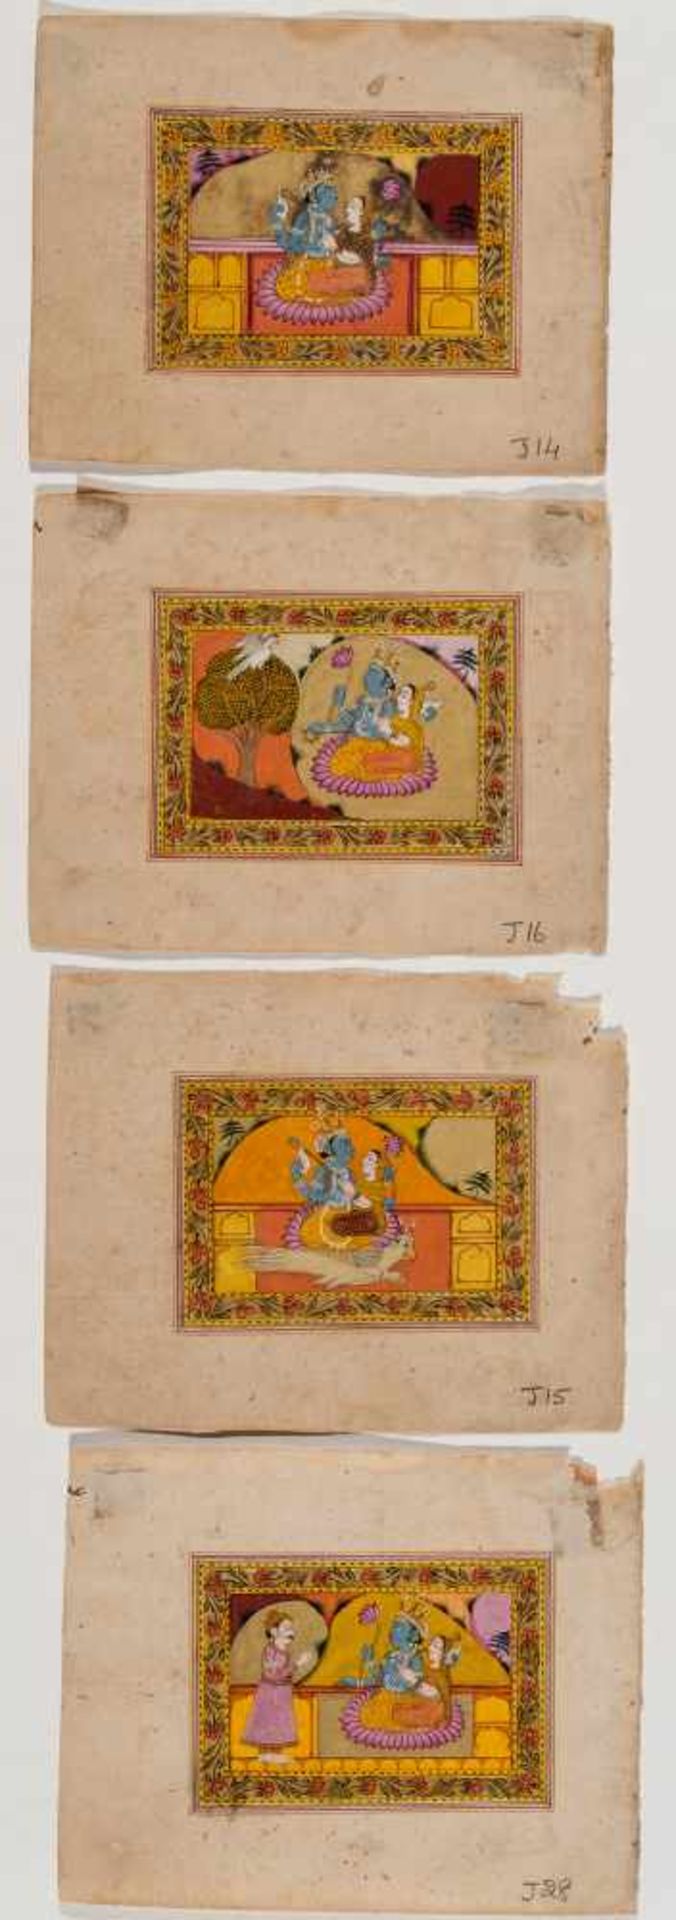 FOUR MINIATURE PAINTINGS DEPICTING KRISHNA WITH RADA – INDIA 19TH CENTURYMiniature painting with